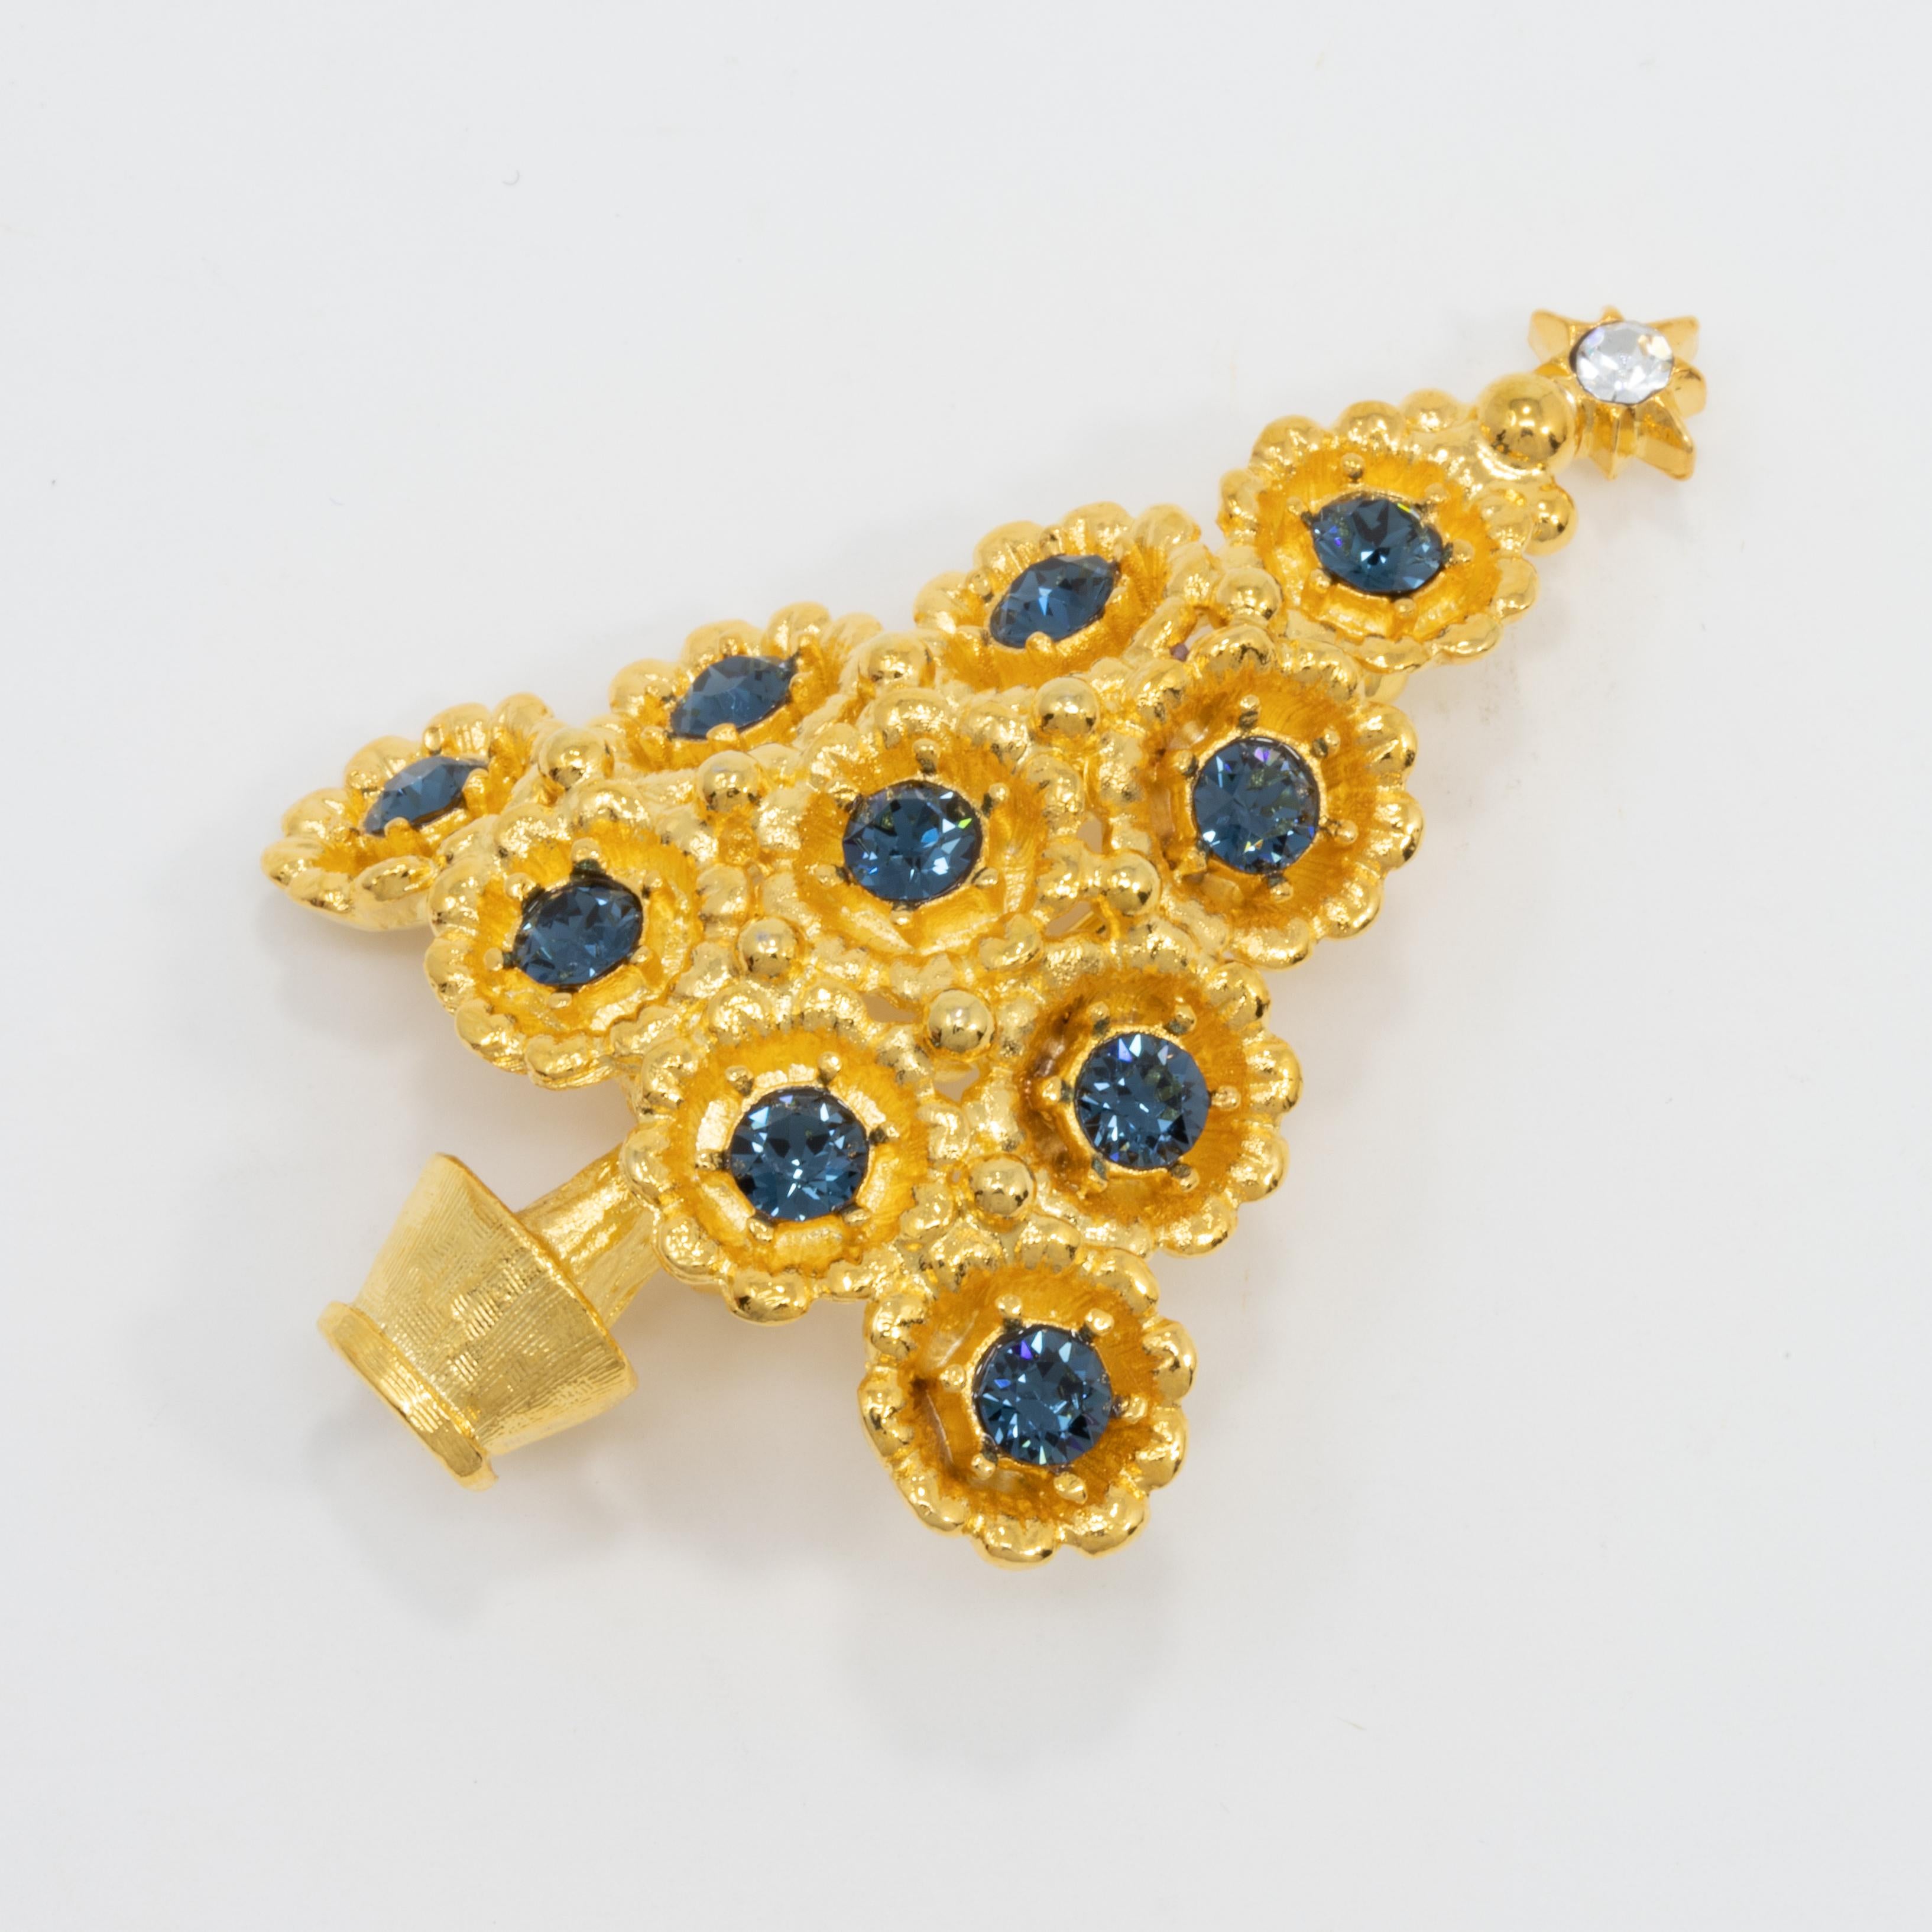 Festive golden pin perfect for any holiday or winter occasion. This Christmas tree is decorated with blue sapphire crystals.

Tags / marks / hallmarks: LIA

Vintage, never-worn piece. Like-new and wonderfully preserved.